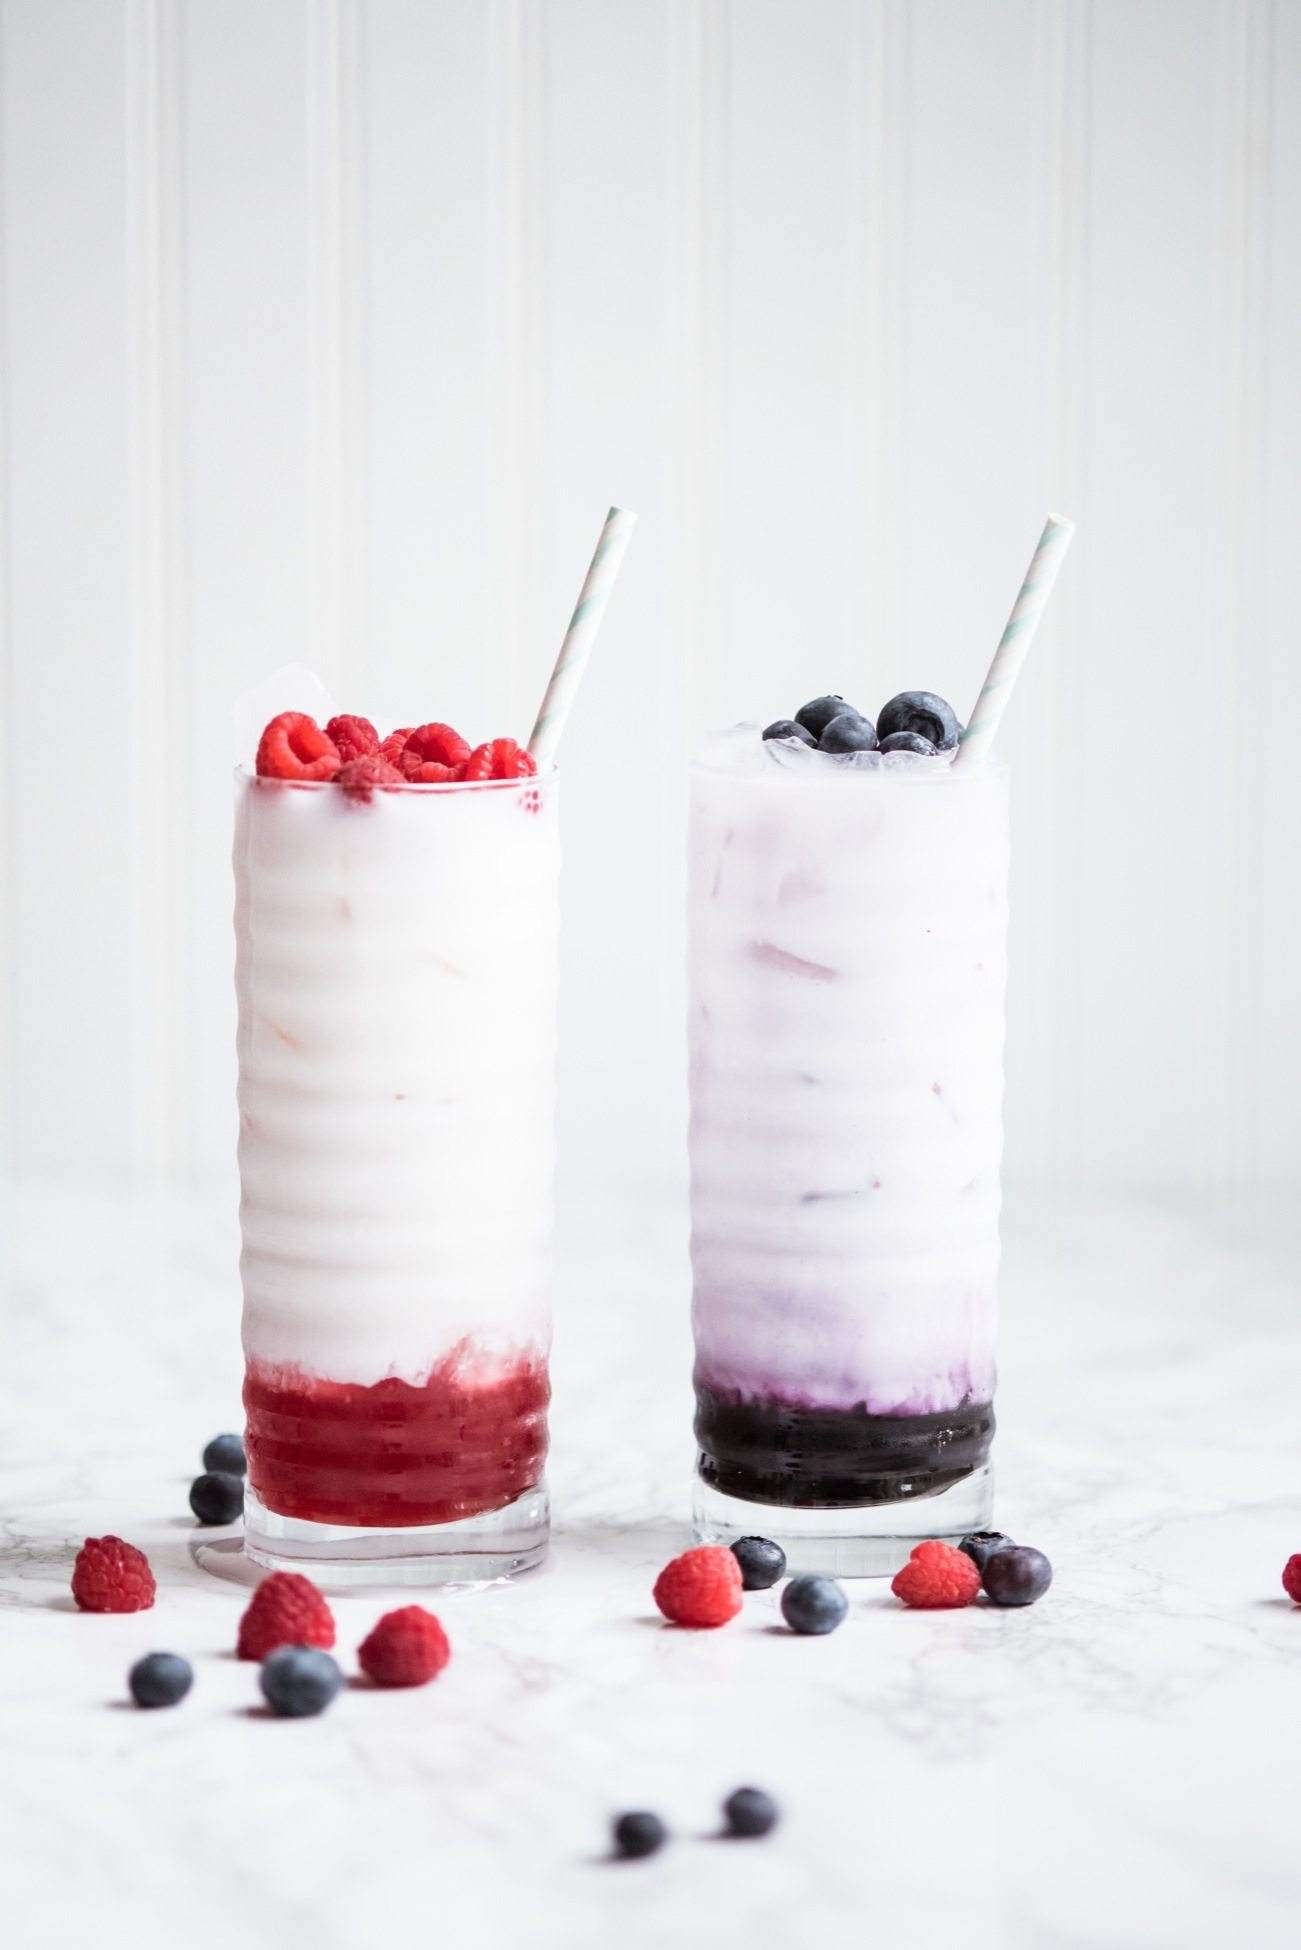 Homemade Italian Soda Recipe | Entertaining tips, party ideas, 4th of July ideas, party themes, party recipes and more from @cydconverse